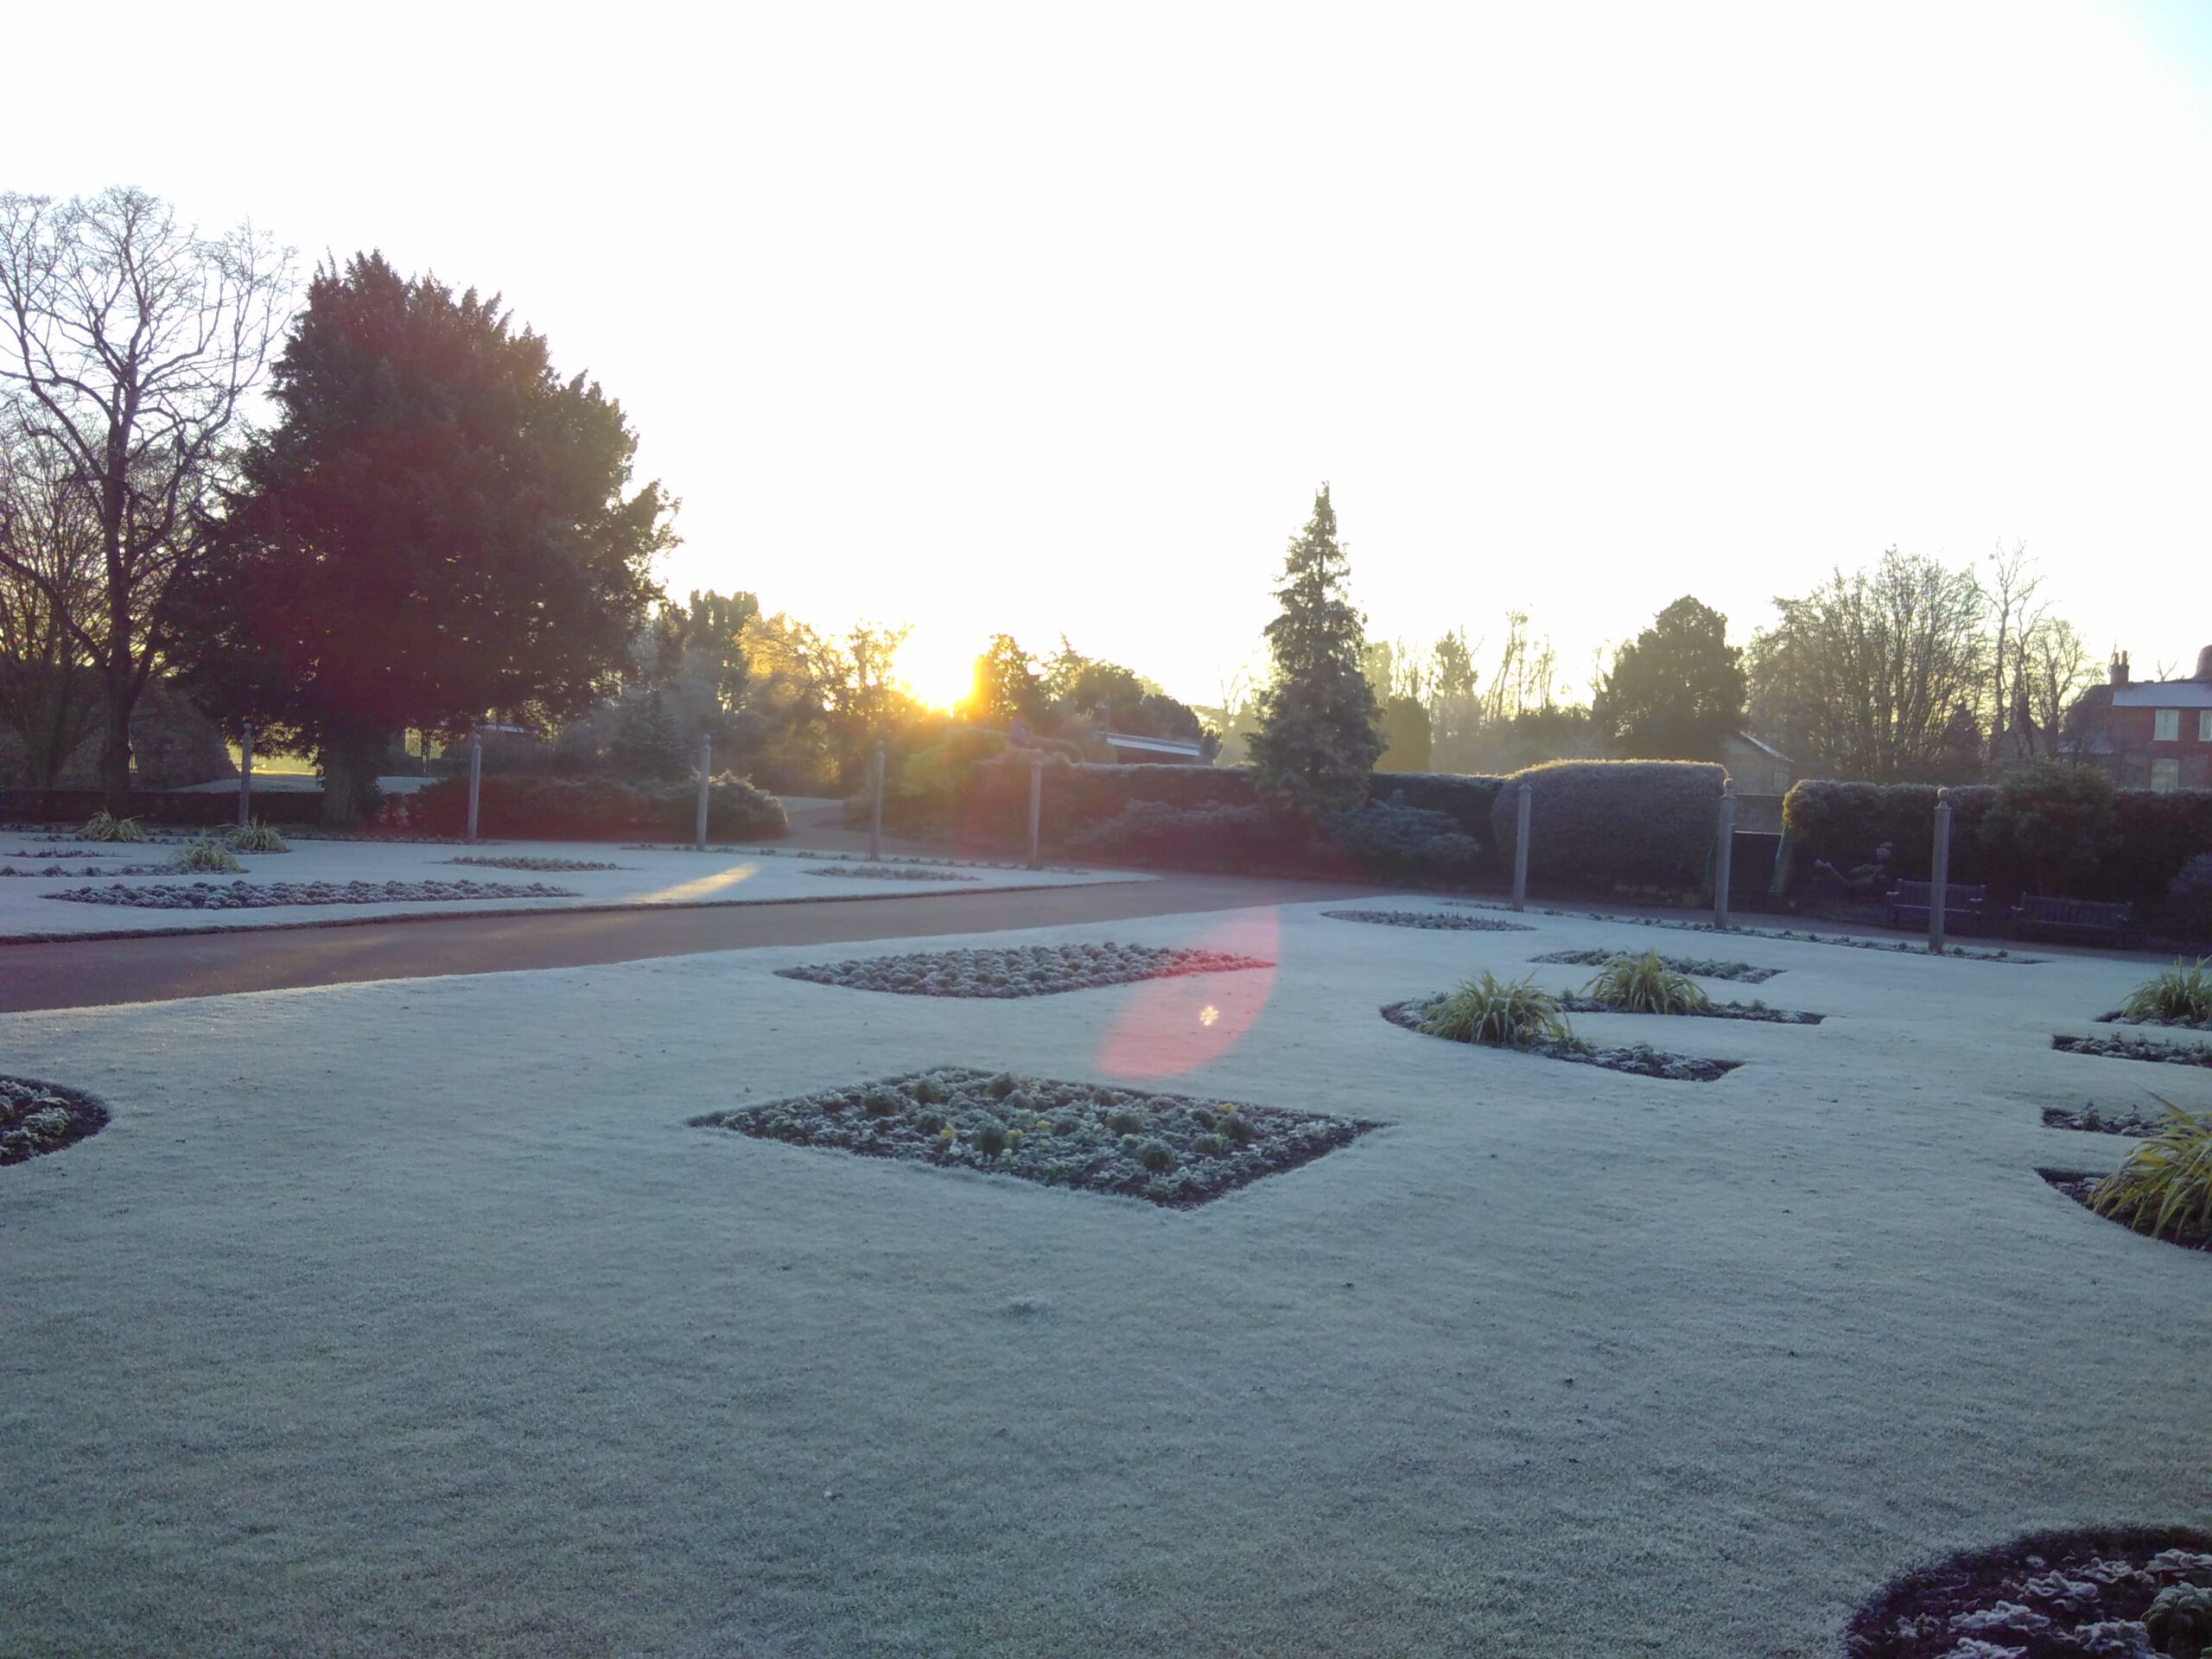 The sun rises beyond hedges on a frosty morning in a park.